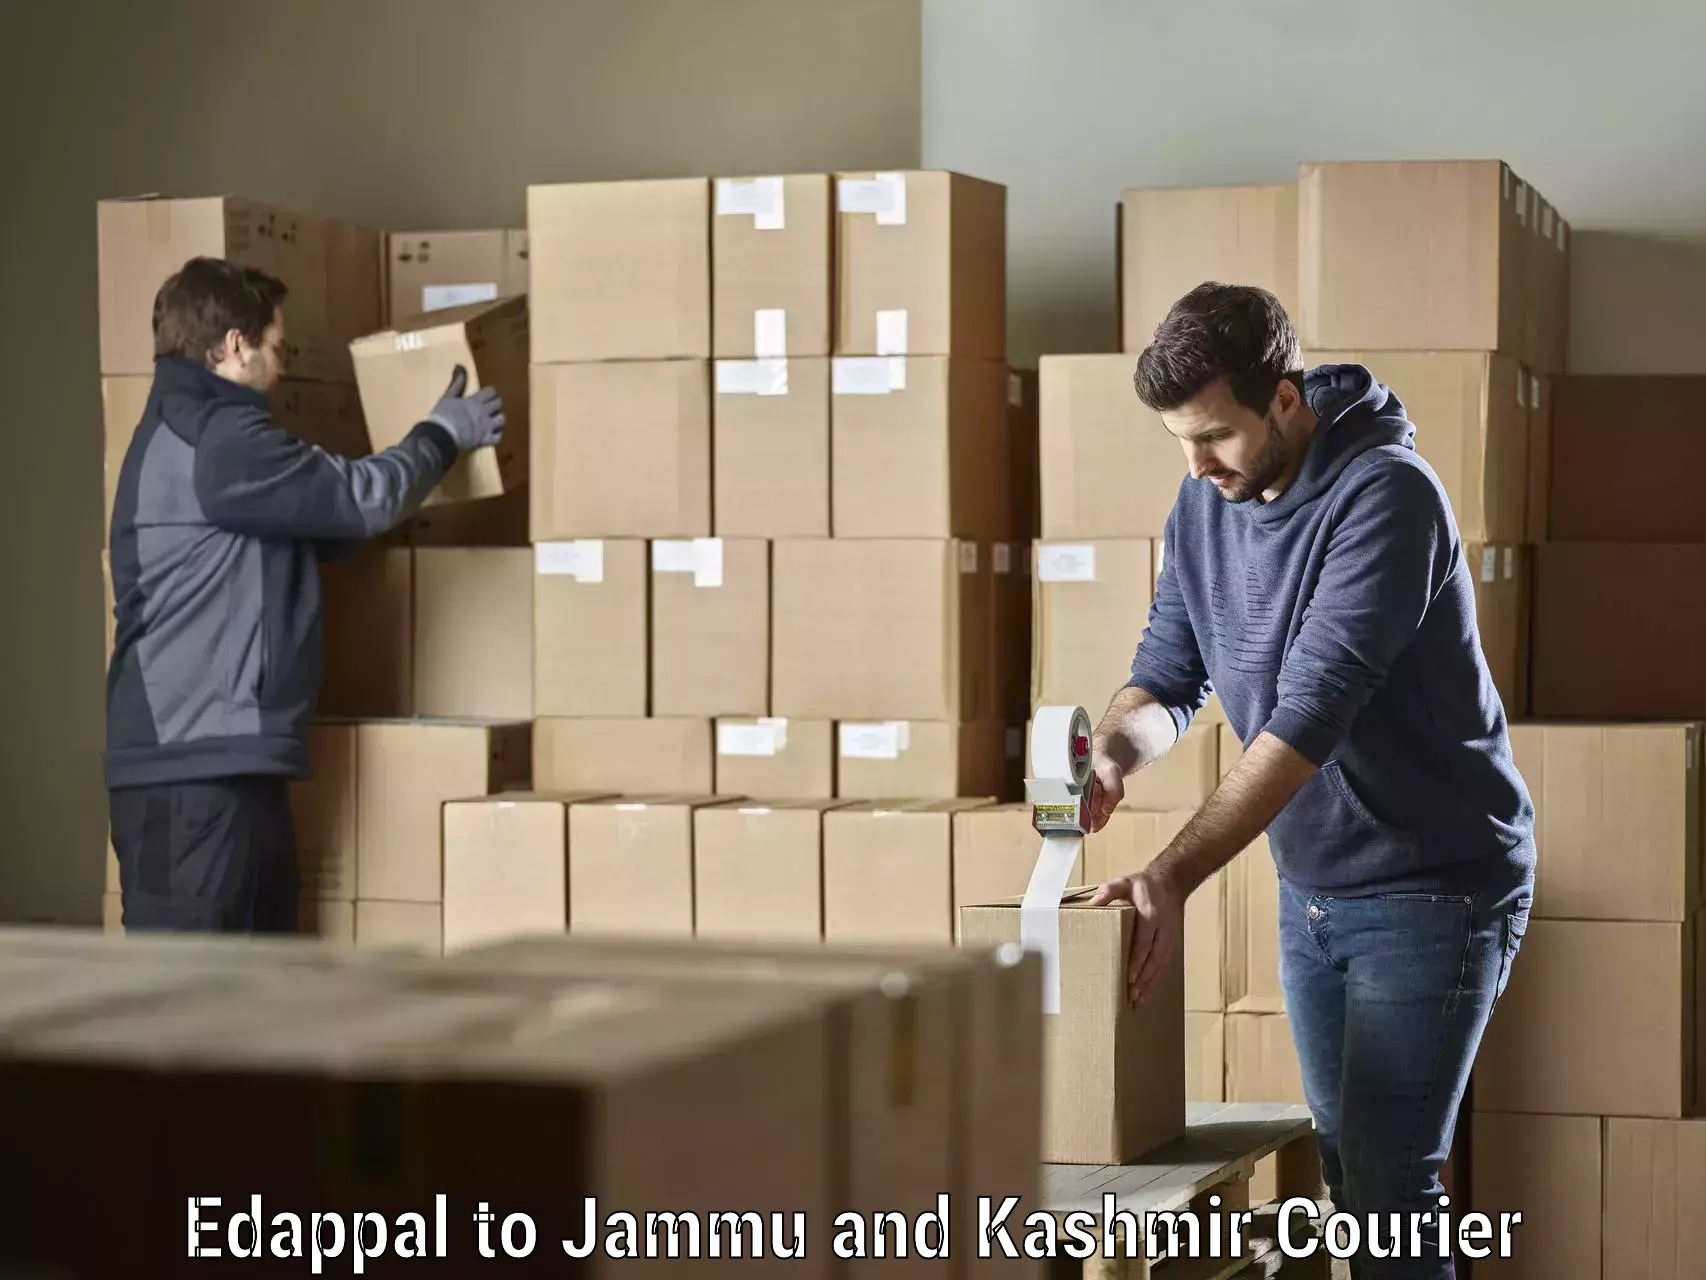 Efficient order fulfillment in Edappal to Nagrota